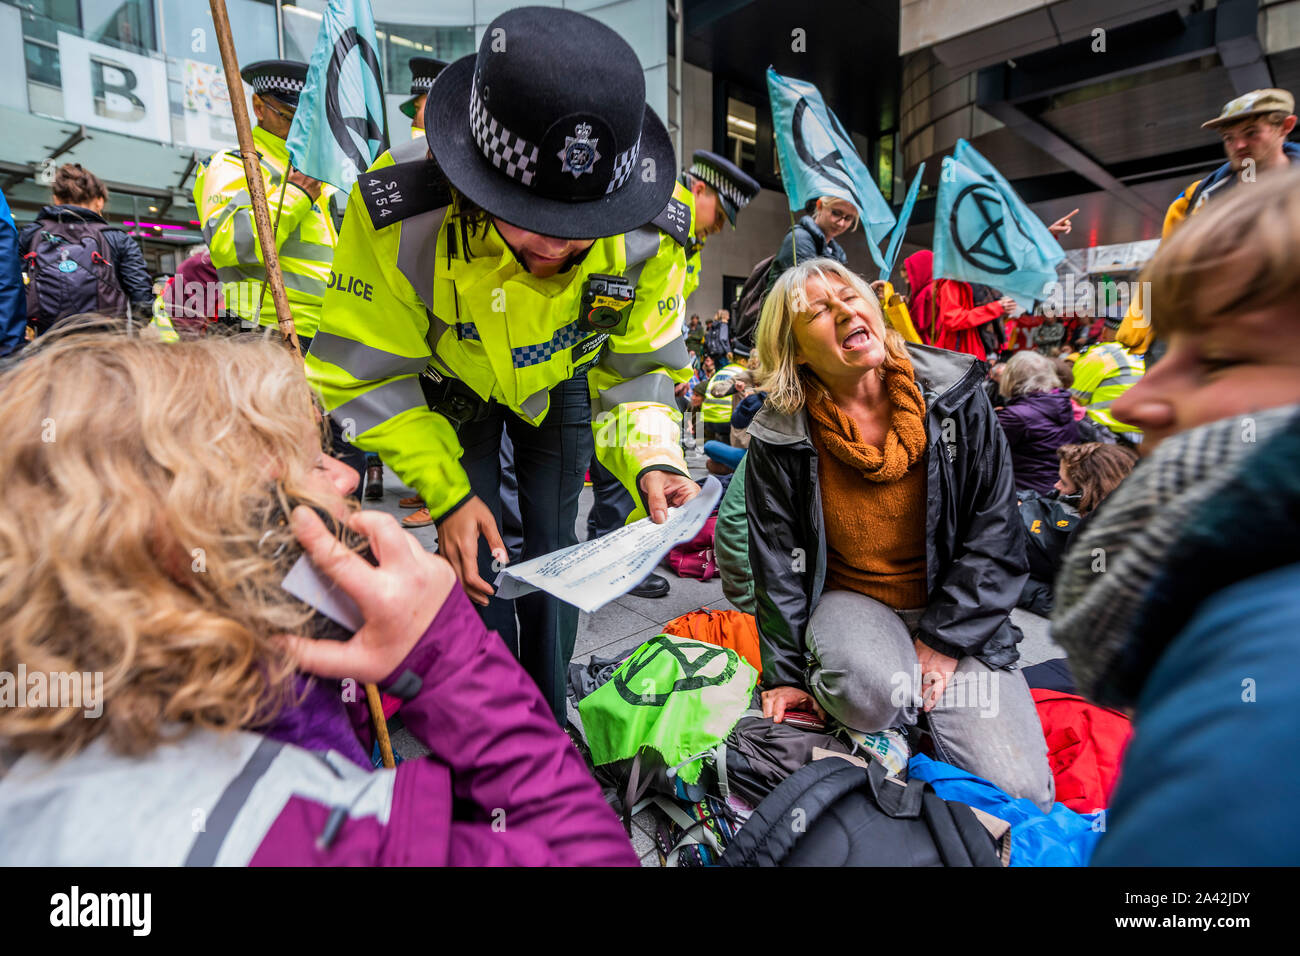 London, UK. 11th Oct 2019. Police warn protesters that they may be arrested under section 14 but they mostly ignore them or make noise to avoid hearing - XR Wales blockade the BBC Broadcasting House in Portland Place because they believe they have been slow to speak up on climate change - The fifth day of the Extinction Rebellion October action which has blocked roads in central London. They are again highlighting the climate emergency, with time running out to save the planet from a climate disaster. Credit: Guy Bell/Alamy Live News Stock Photo